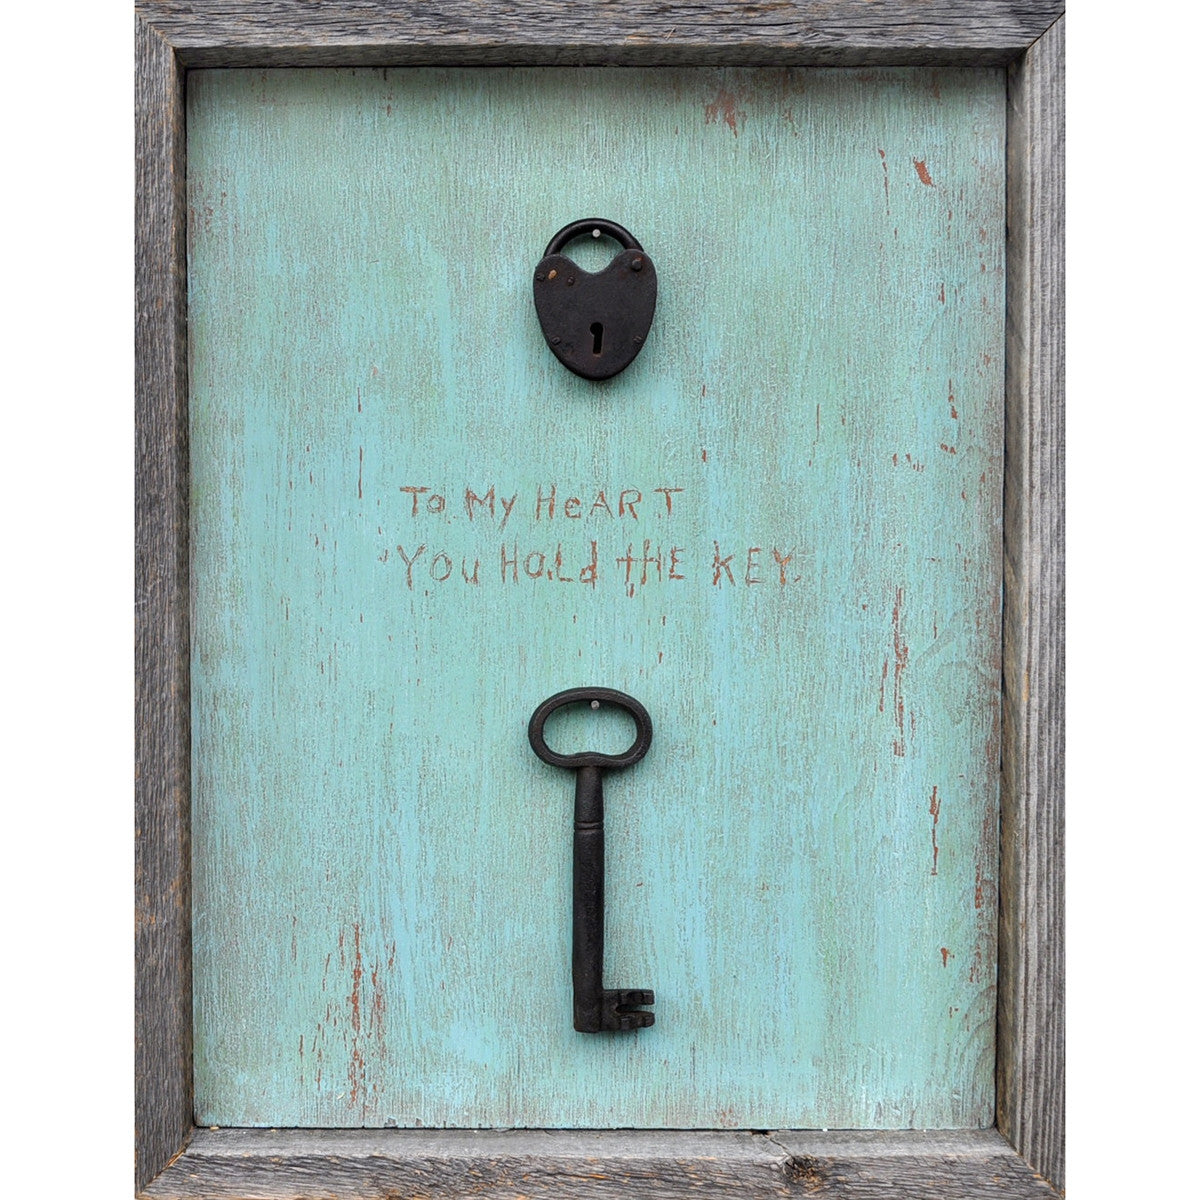 To My Heart You Hold The Key